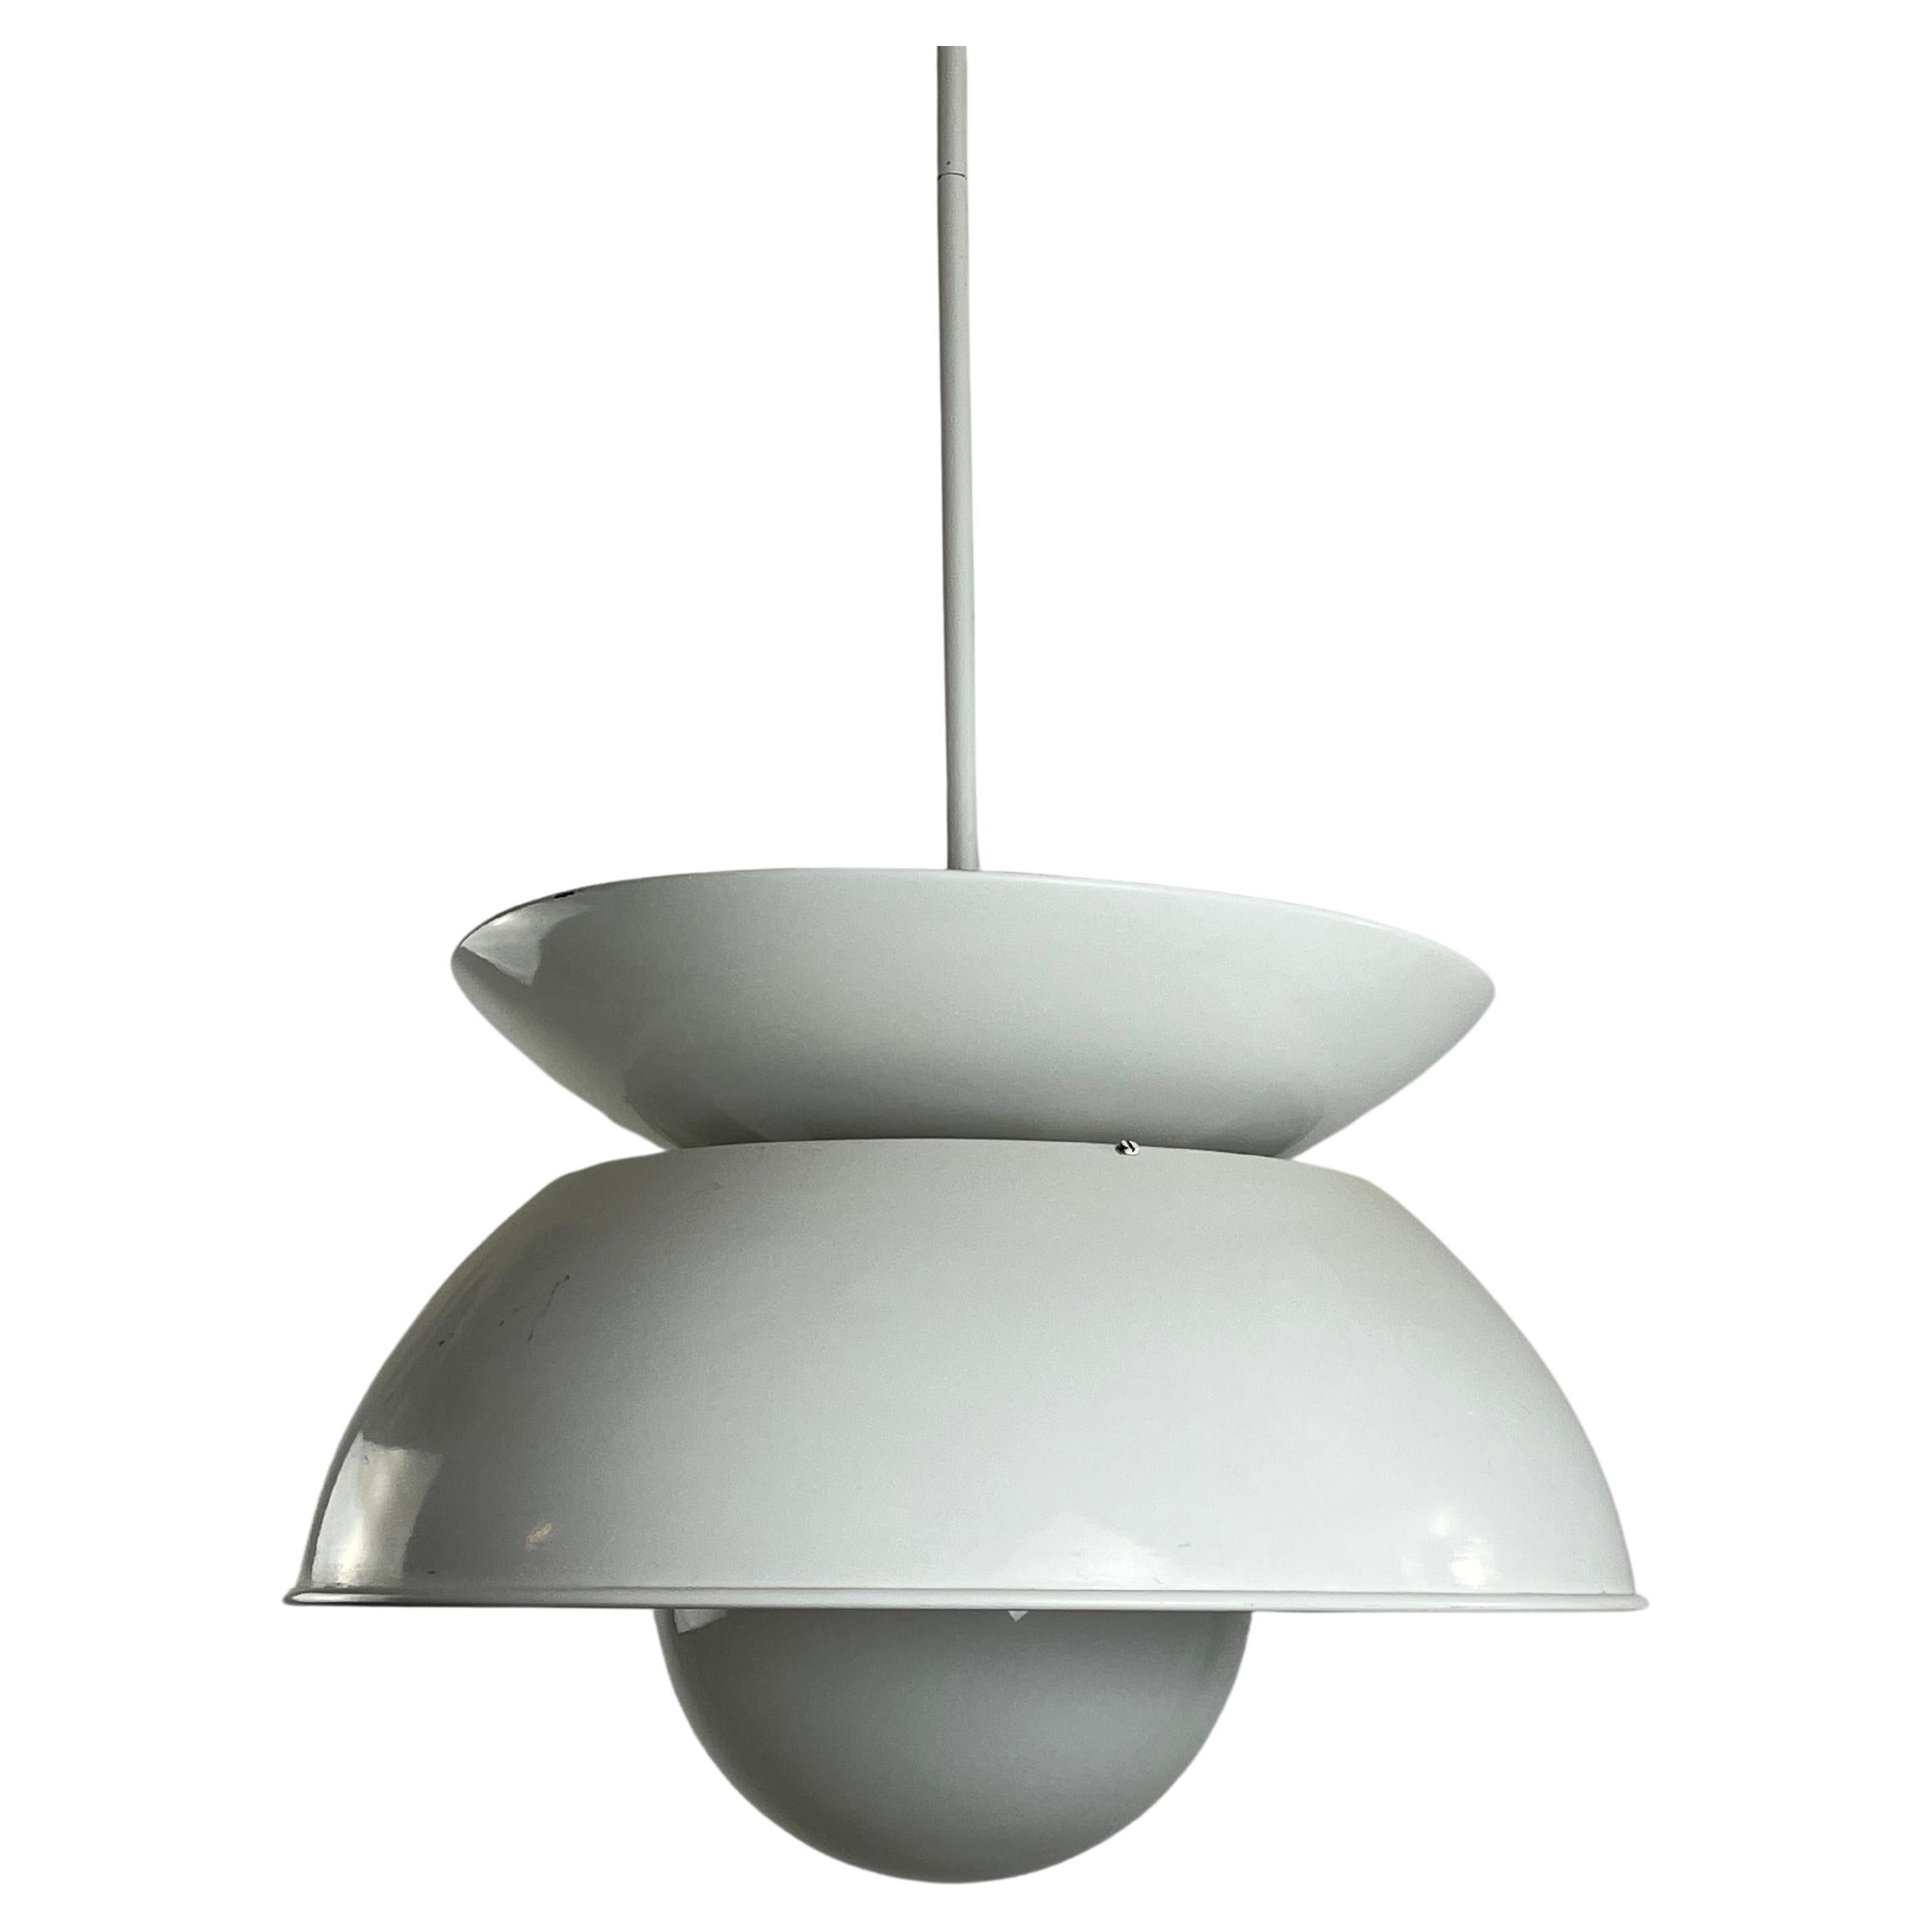 Mid-Century Cetra Model Chandelier Attributed To Vico Magistretti for Artemide For Sale